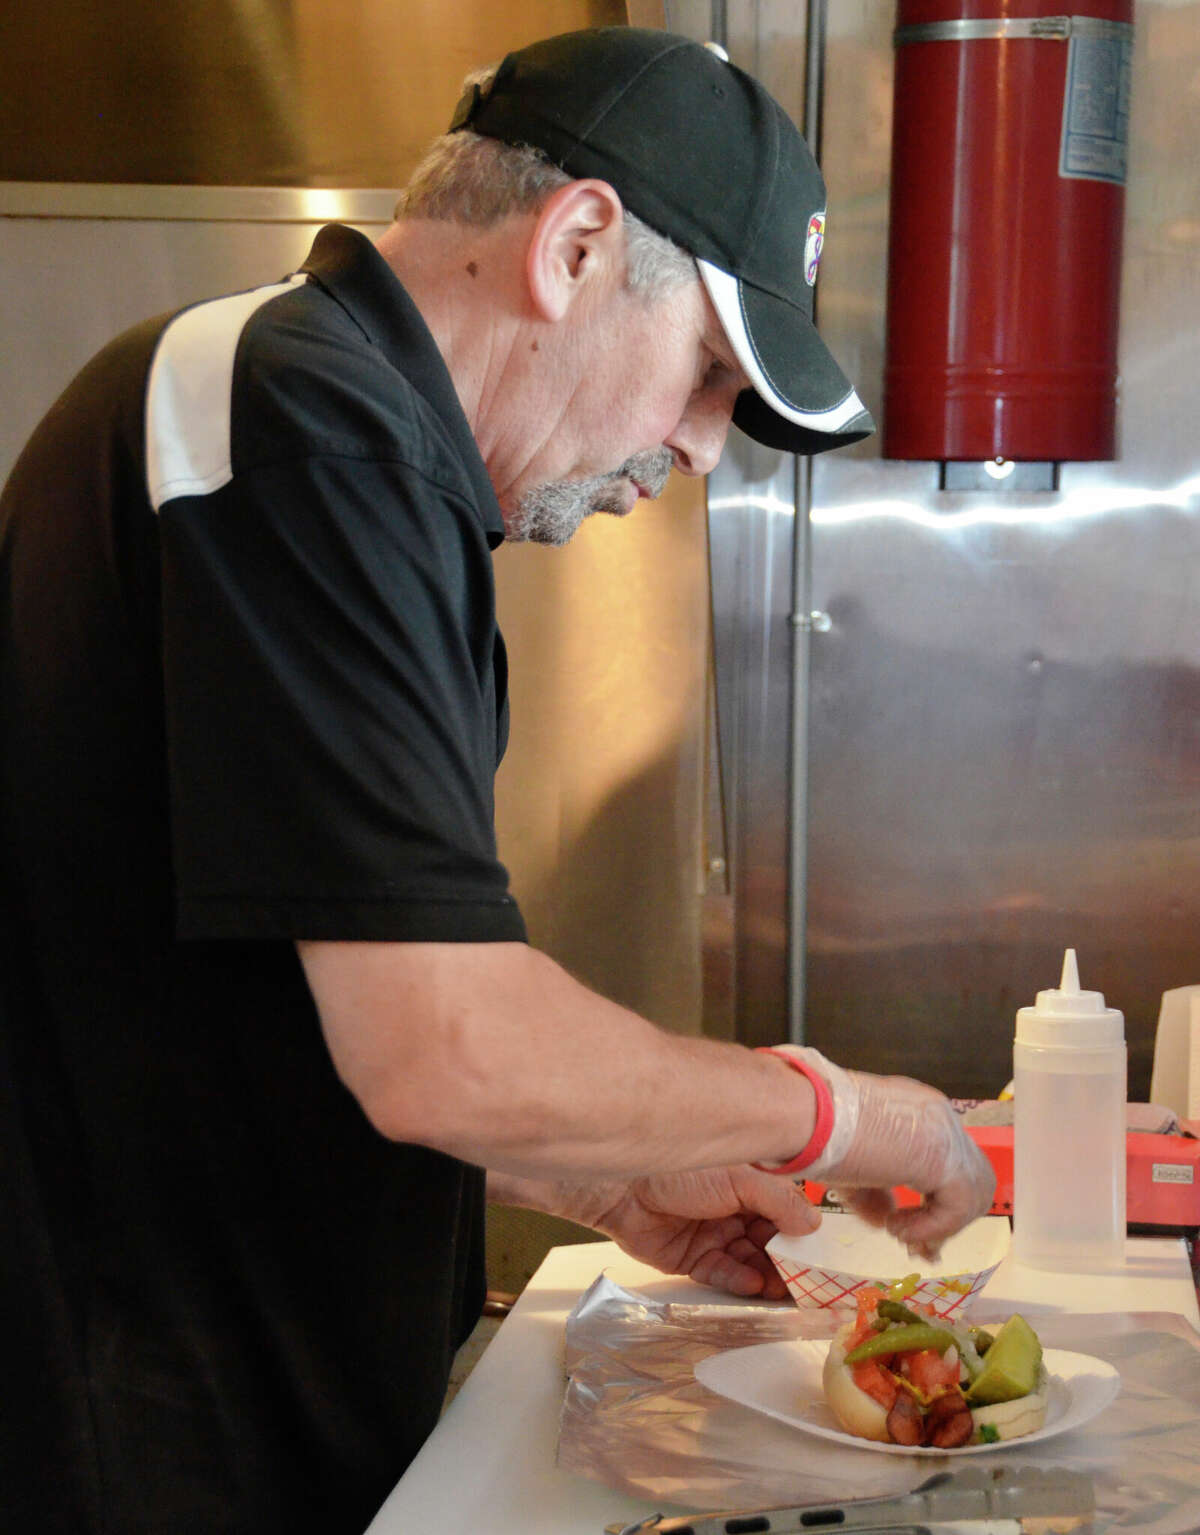 Jeff 'Jake' Russell prepares one of his classic hot dogs at Jake's Diggity Dogs in downtown Milford, Conn.